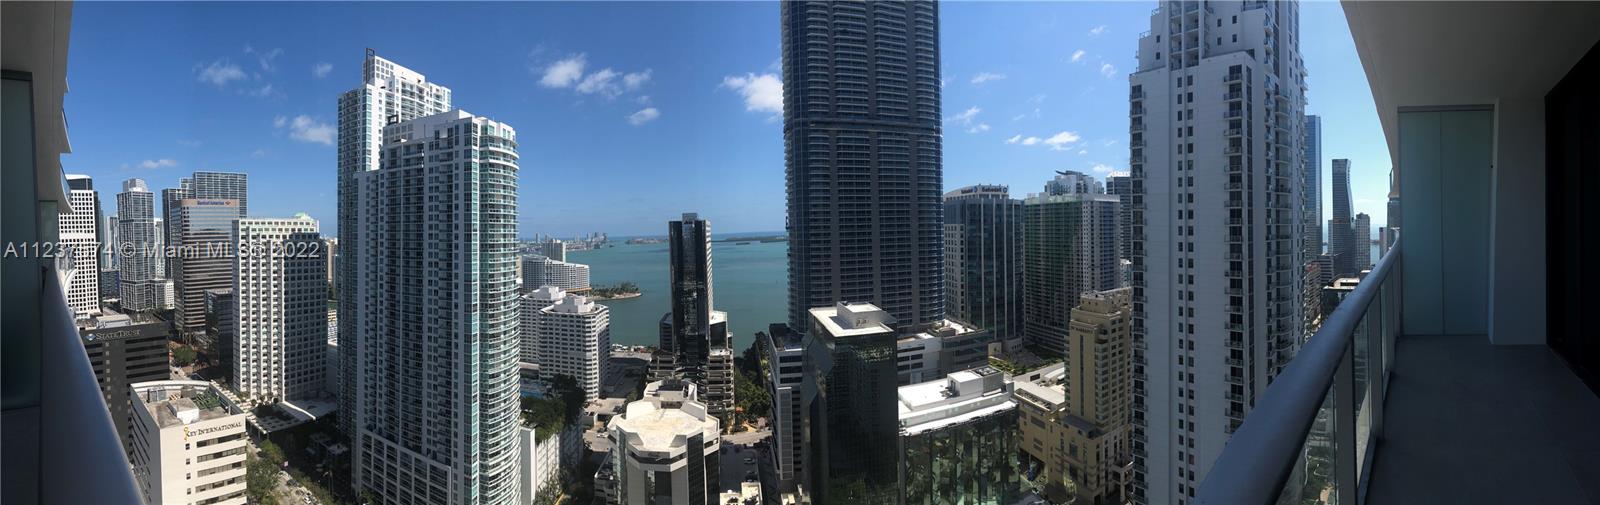 2 bed + DEN unit, centrally located in the most amazing condo in the Brickell area, LOTS of amenities for residents ONLY. Private elevator, breathtaking ocean + city views.